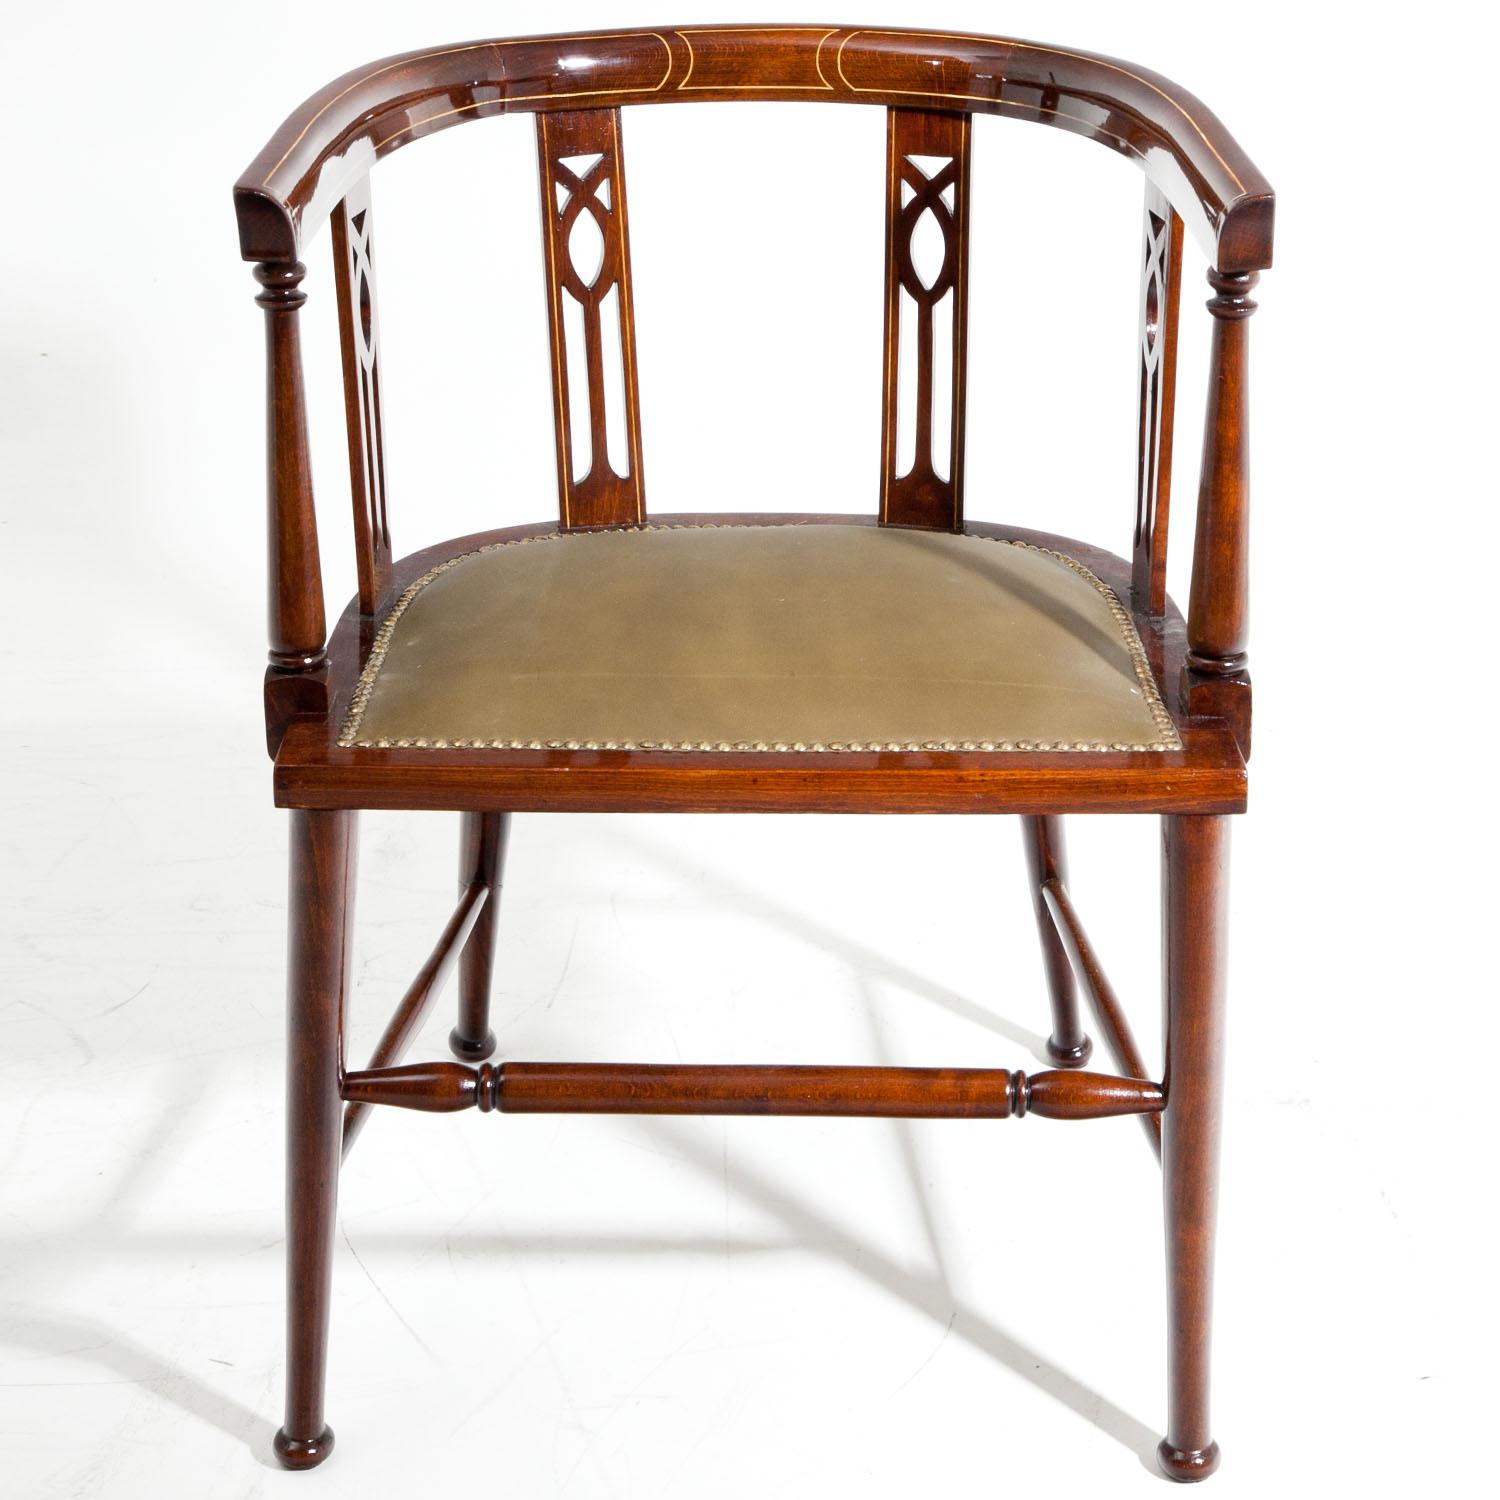 English desk chair standing on conical legs with turned stretcheres between them. The curved backrest is supported by decorative pierced slats, both of which are decorated with Fine thread inlays. The seat is slightly cushioned and was reupholstered